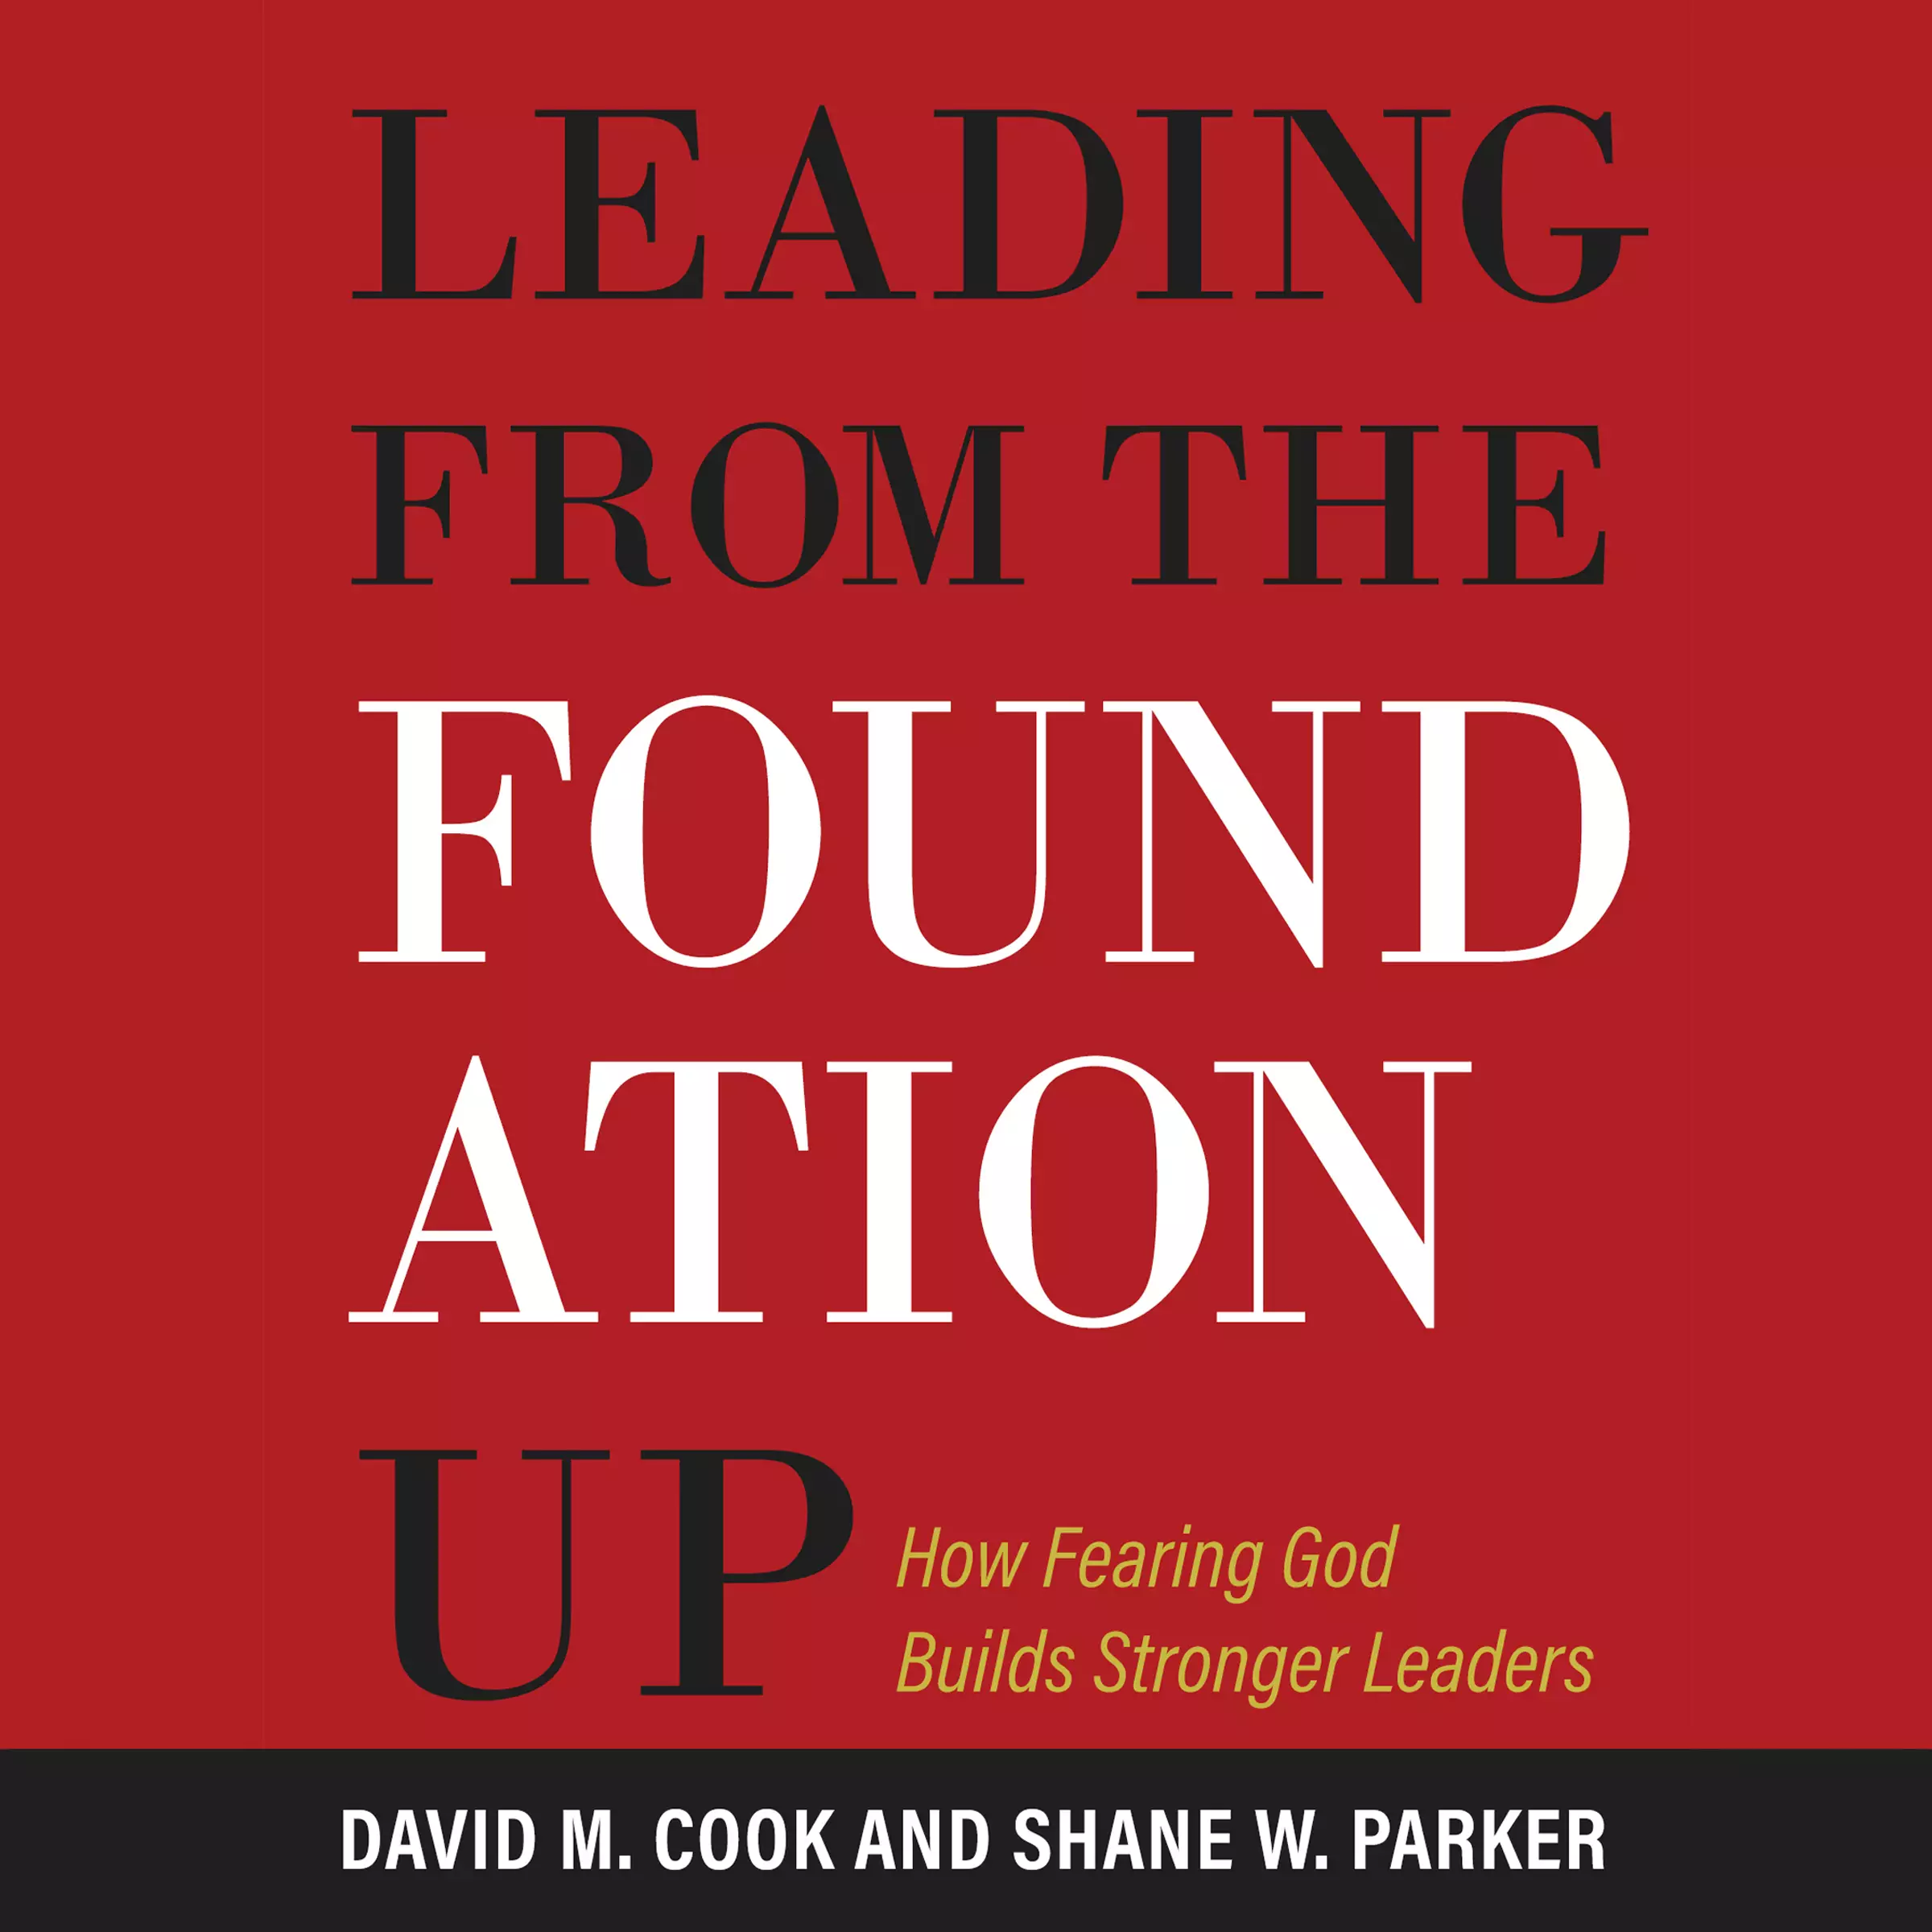 Leading from the Foundation Up